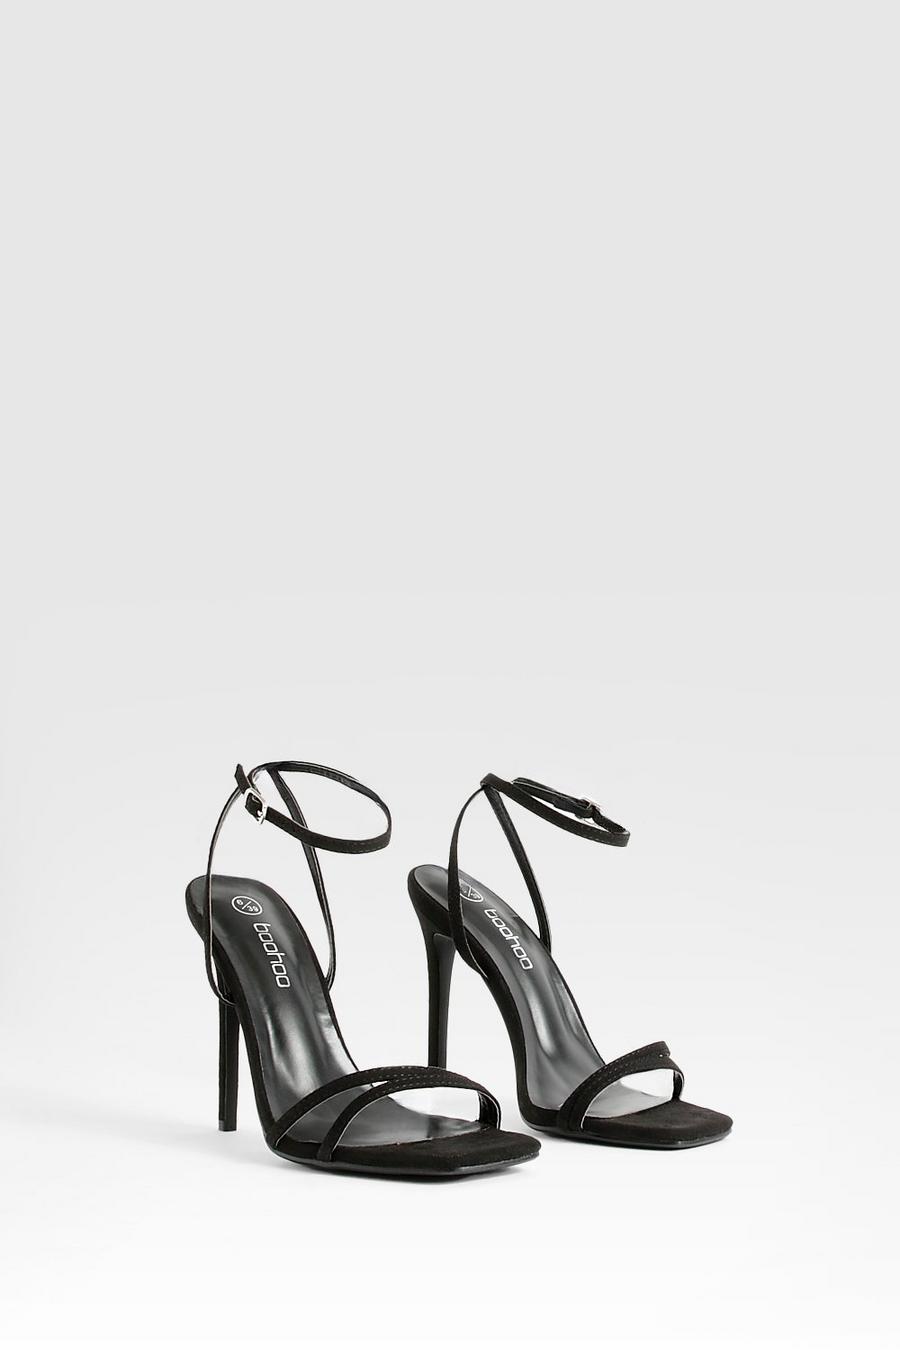 Black Double Strap Barely There Stiletto Heels image number 1